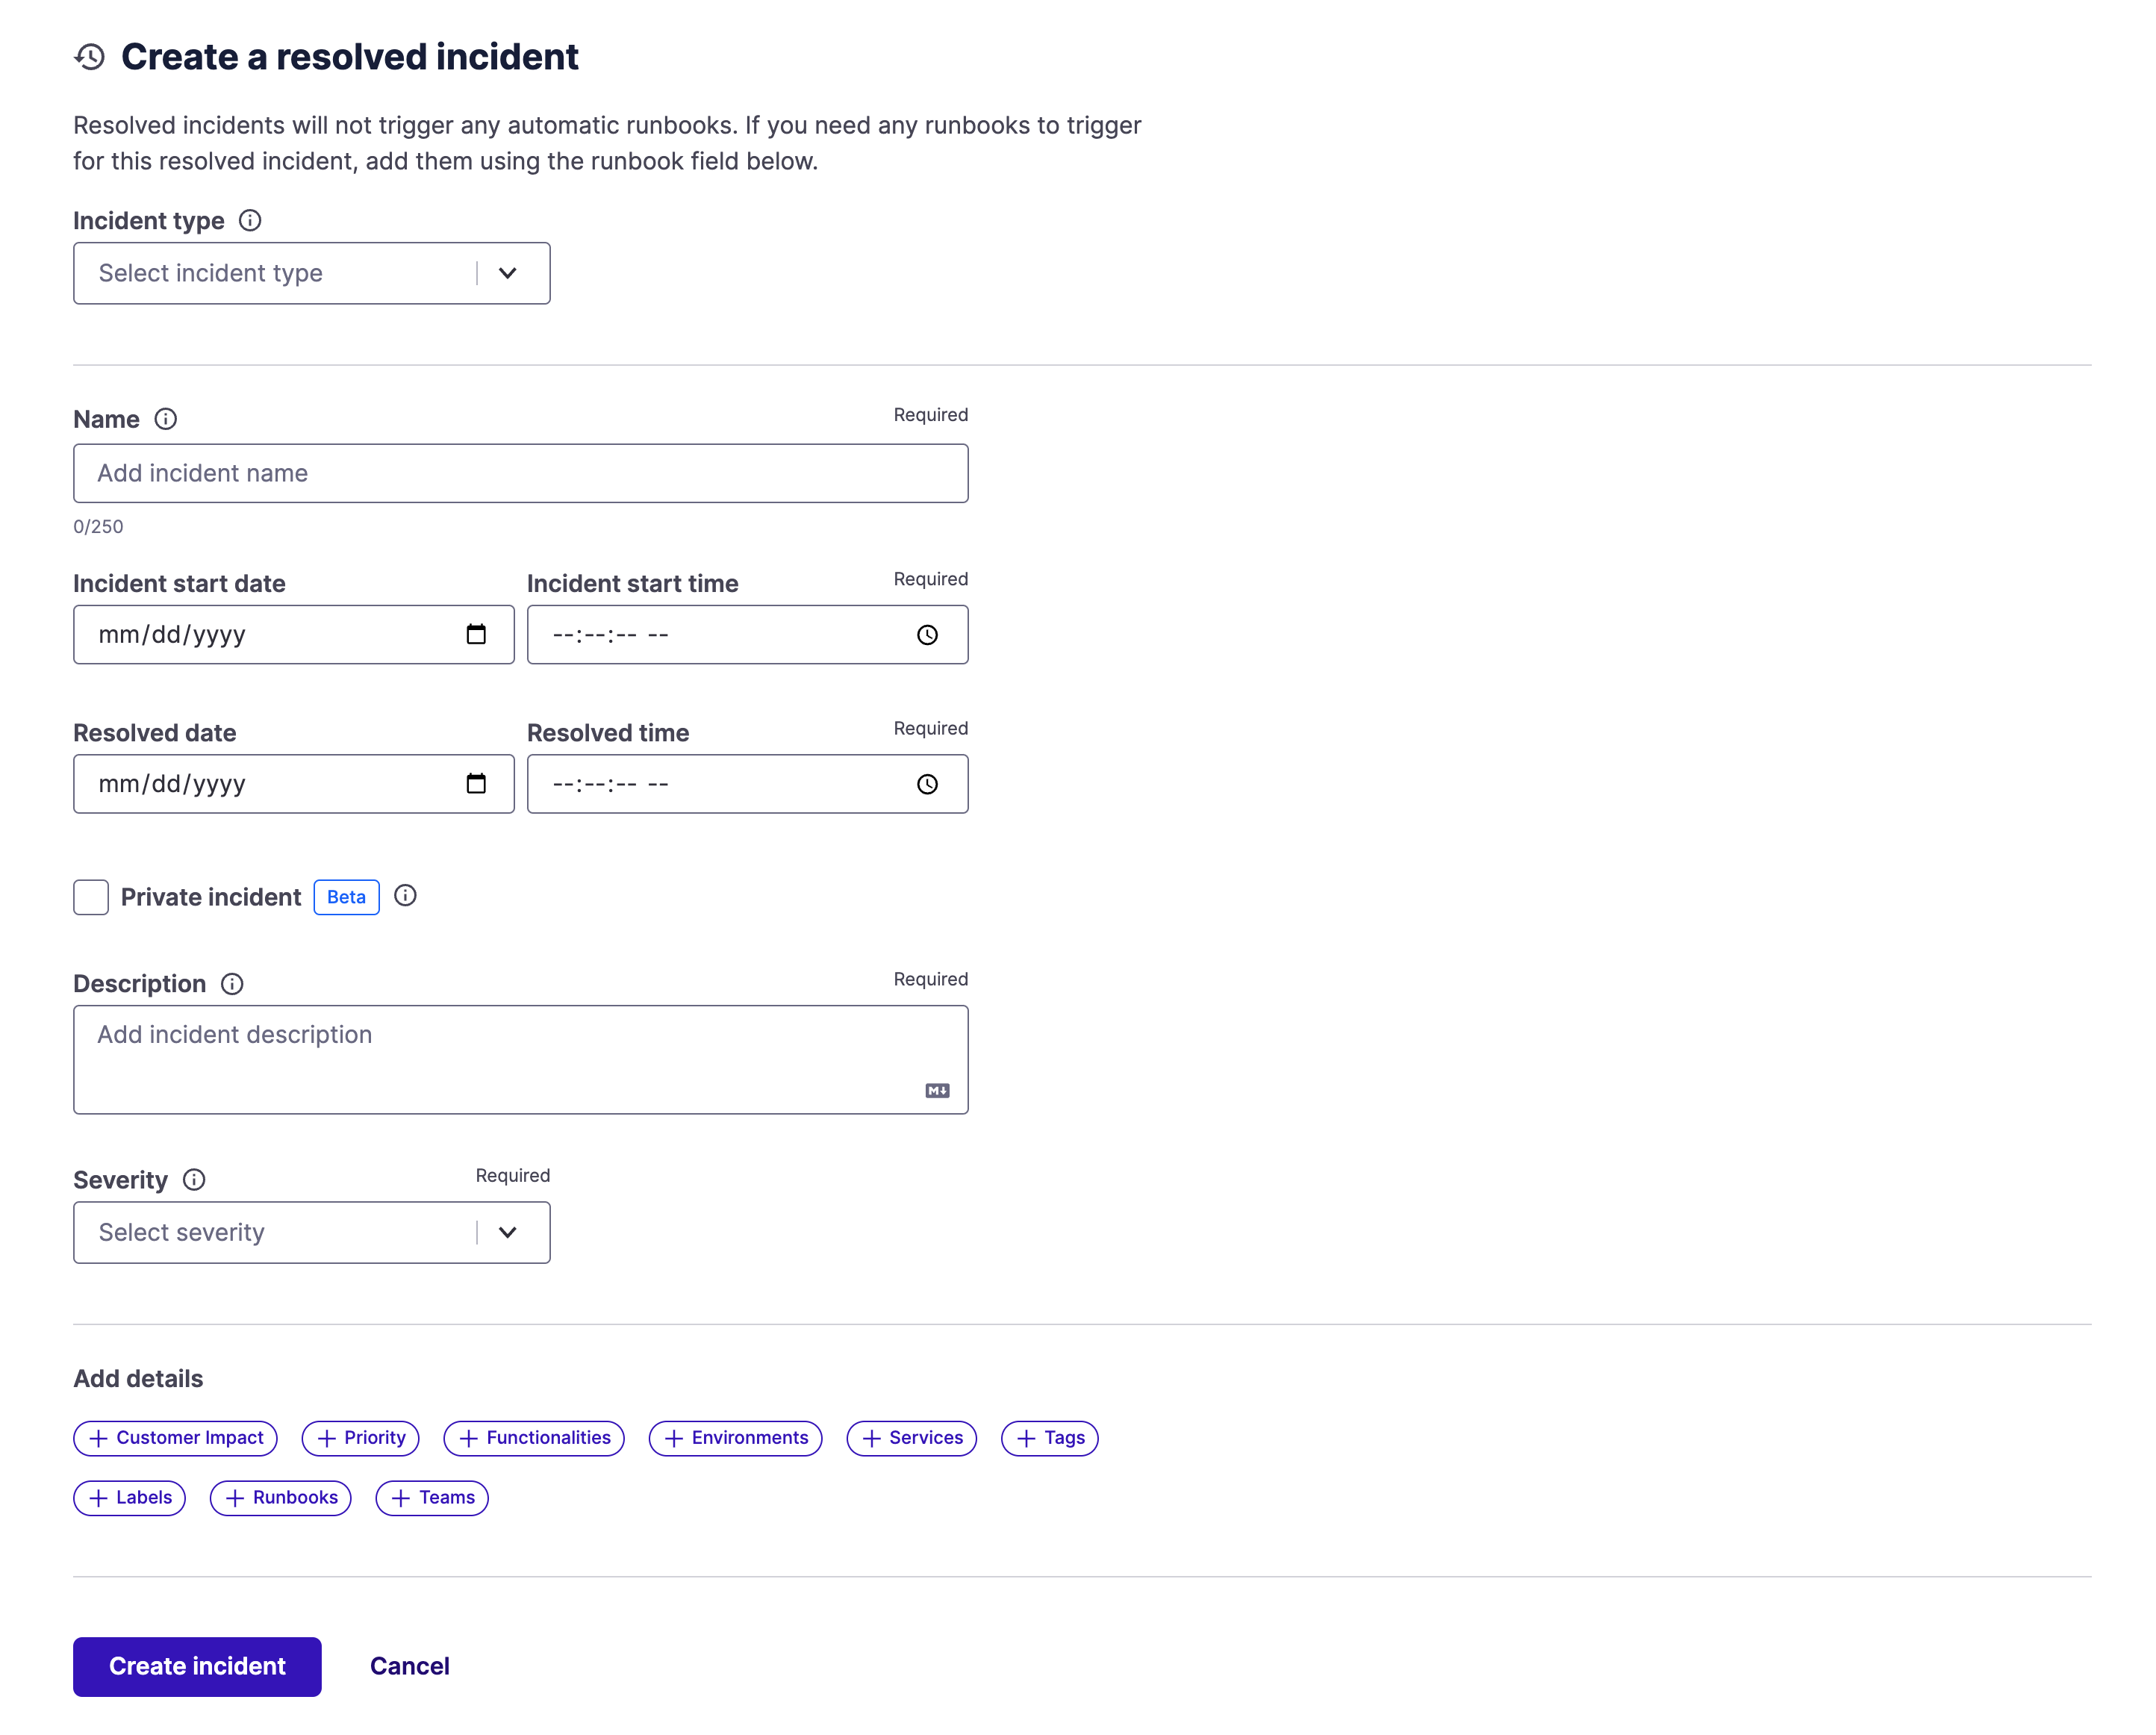 Create Resolved Incident web form